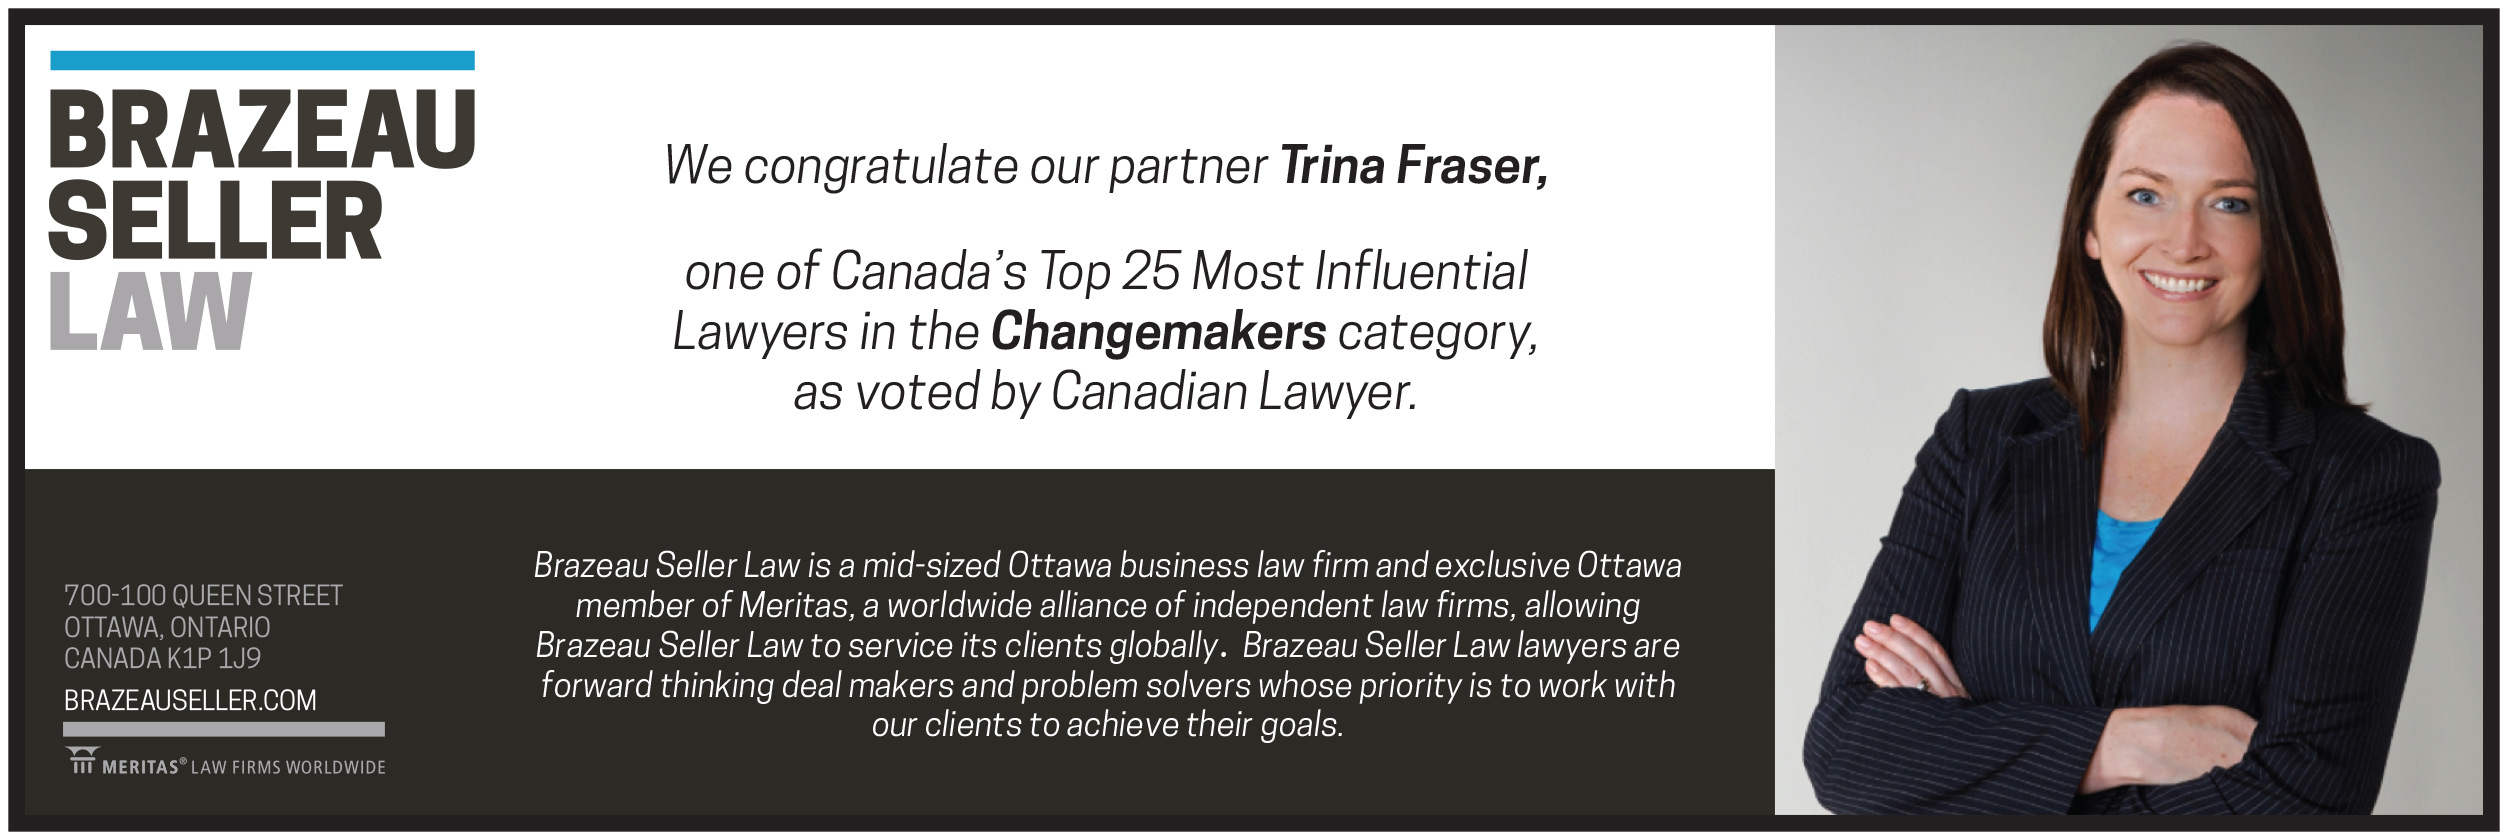 Brazeau Seller Law Congratulates Trina Fraser on being recognized as one of the Top 25 lawyers in Canada by Canadian Lawyer Magazine